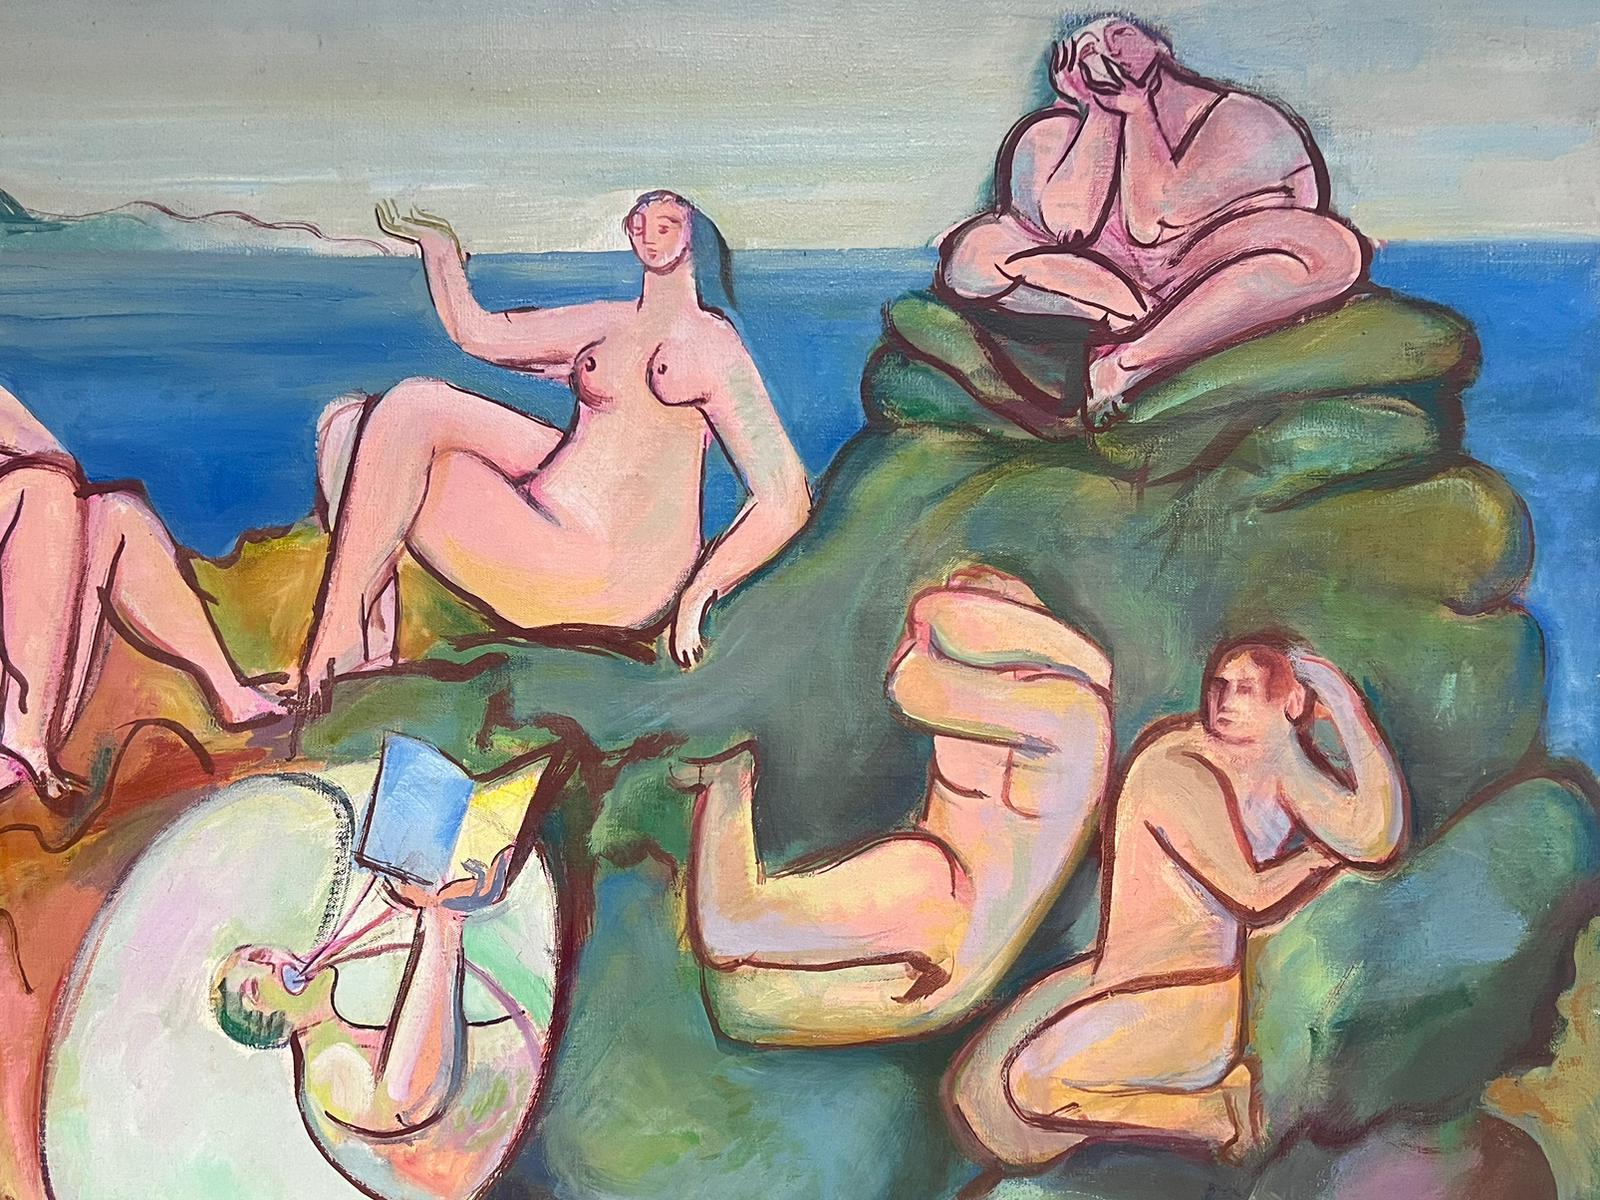 Huge 1950's French Modernist Oil Mythological Pink Nudes on Rocky Coastline - Painting by circle of Pablo Picasso